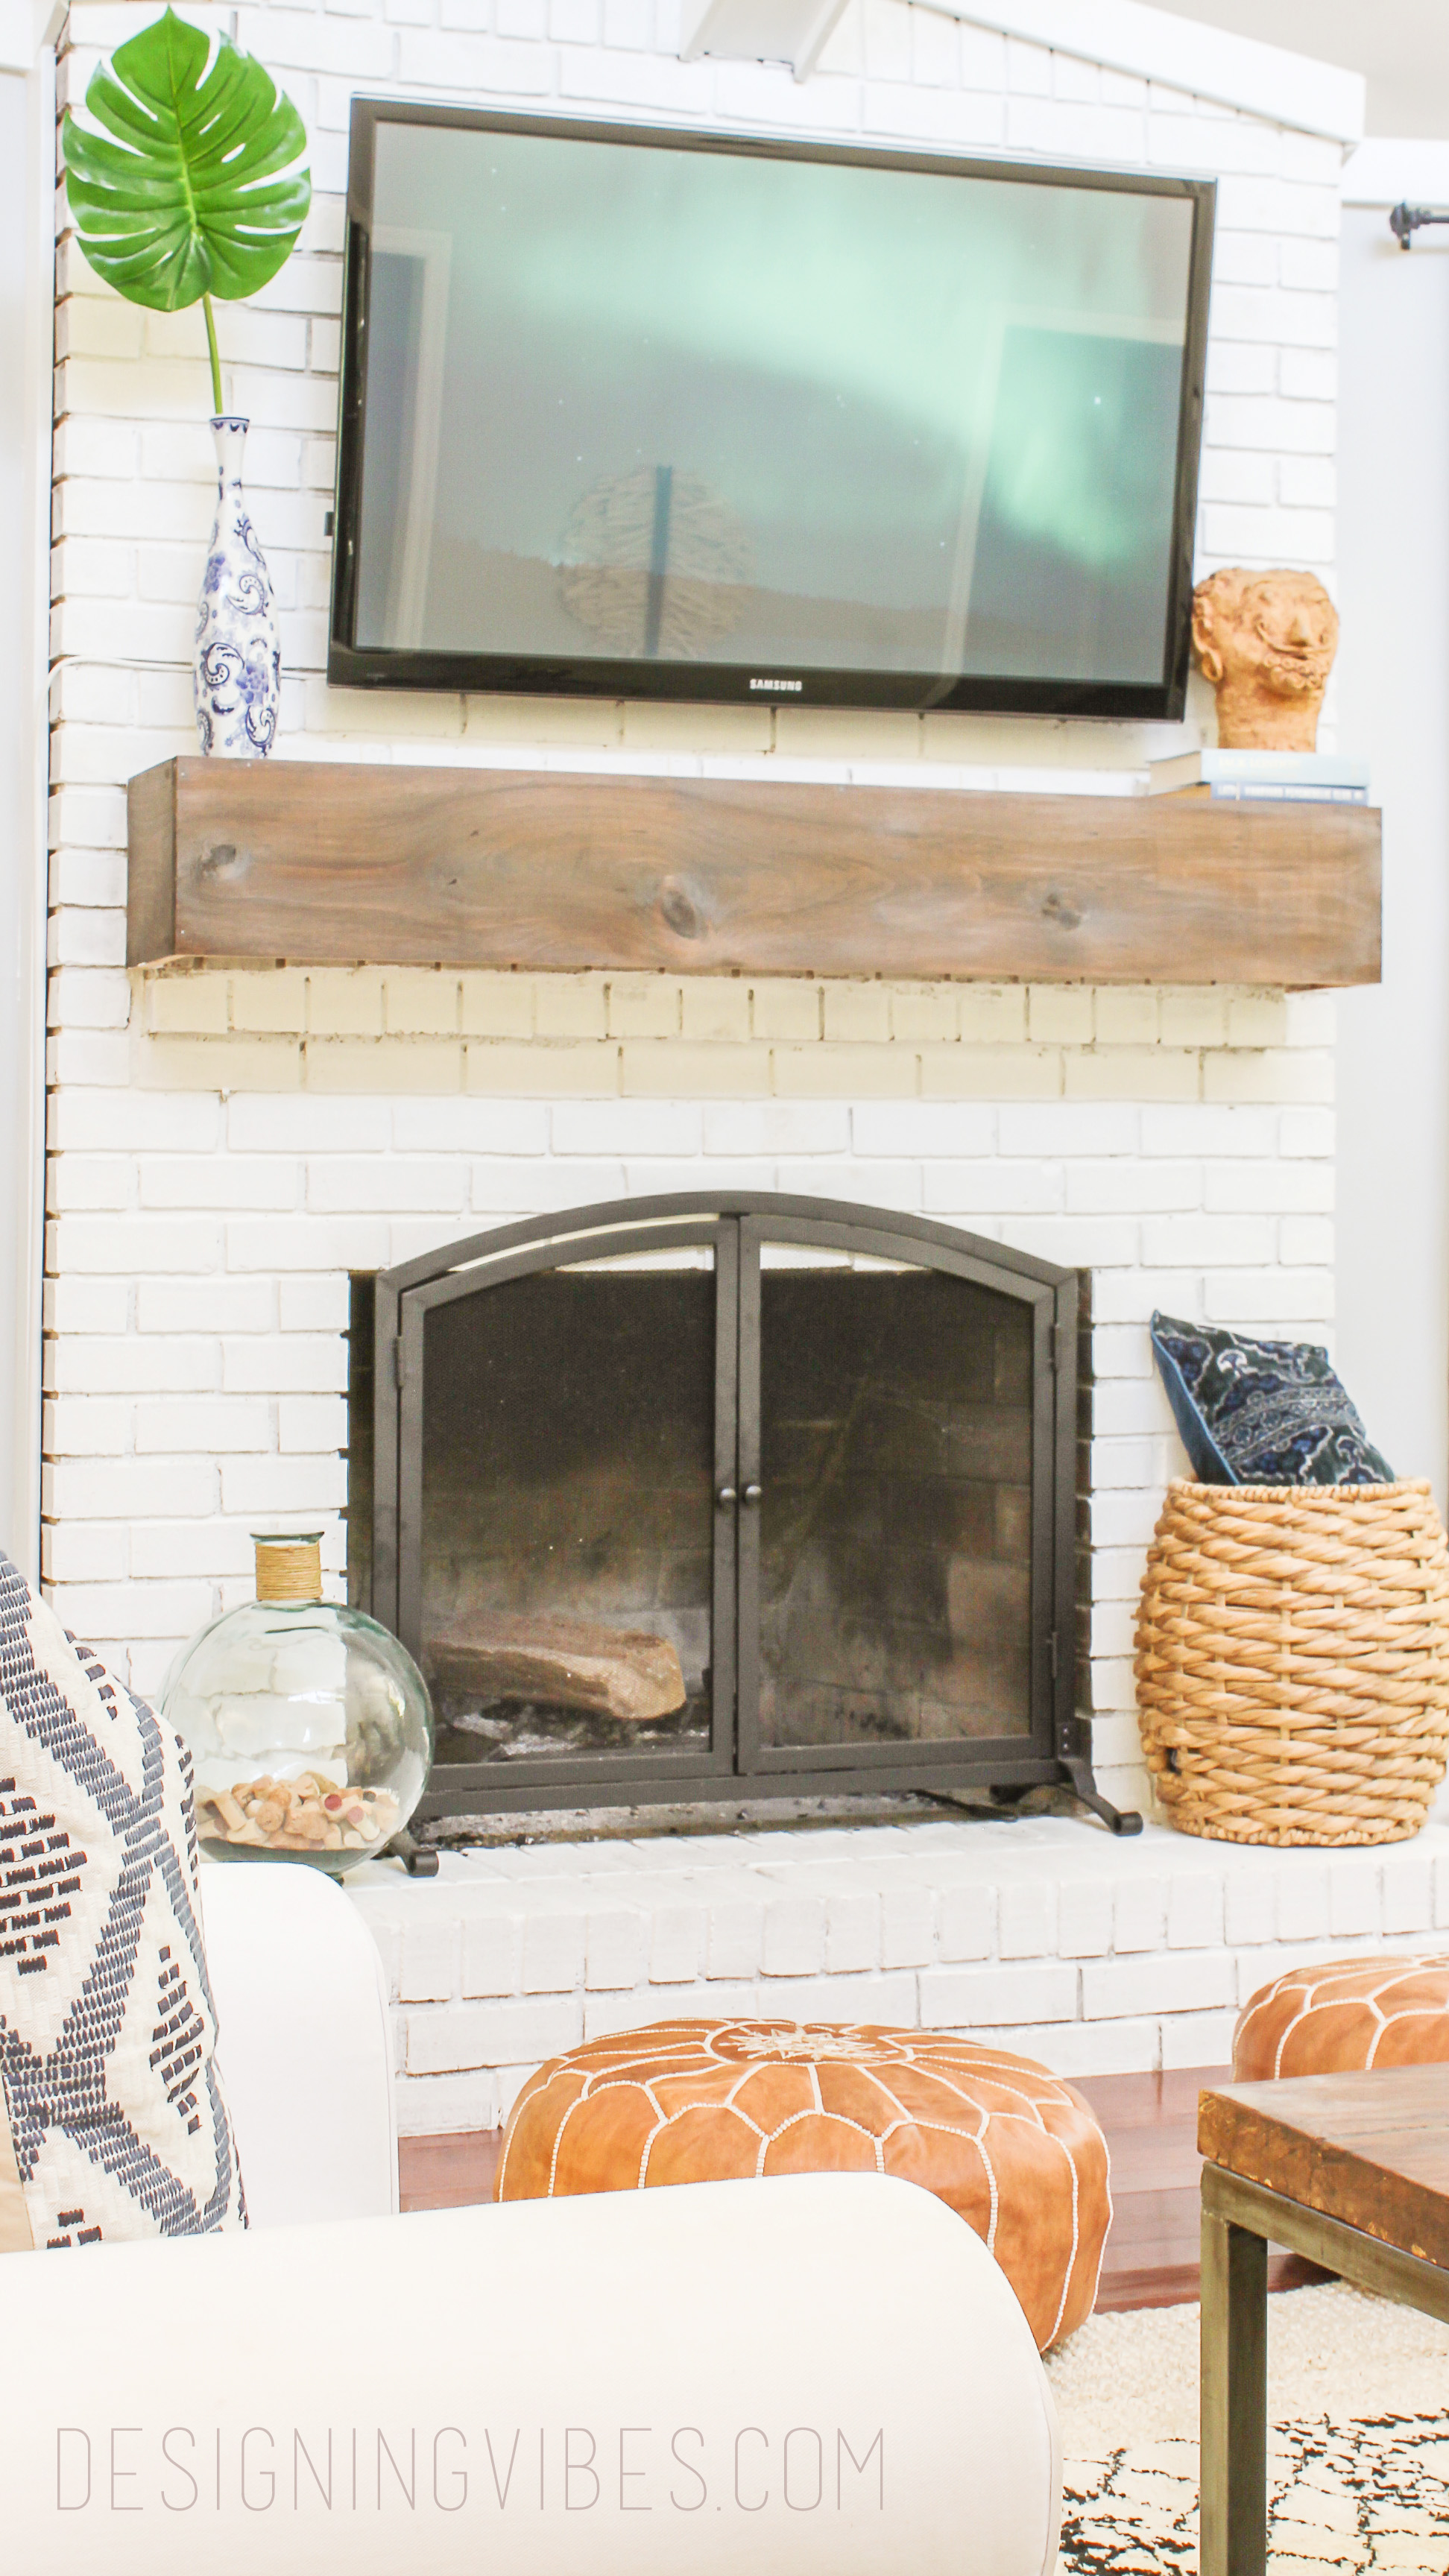 My Painted Brick Fireplace 3 Years Later – A Cautionary Tale